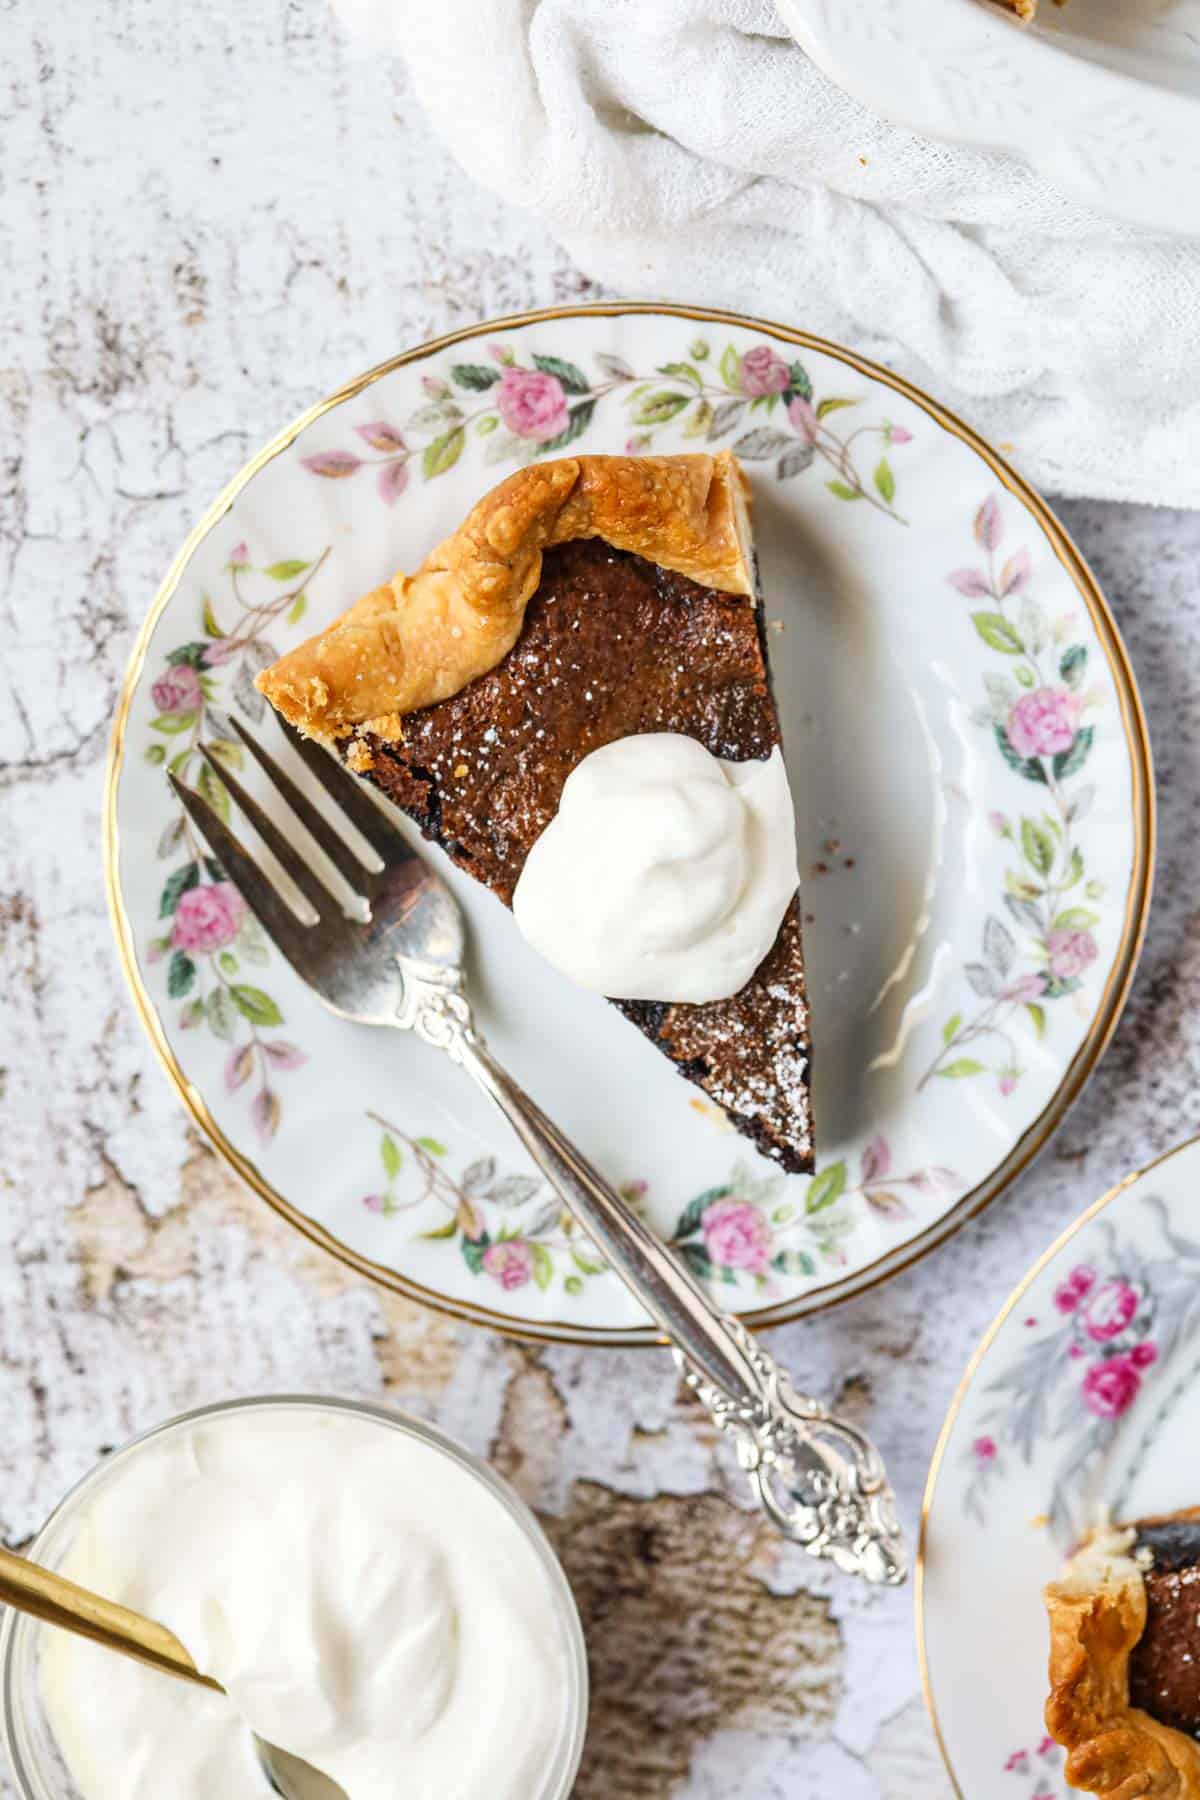 A slice of chocolate chess pie on a white dessert plate with a silver fork.